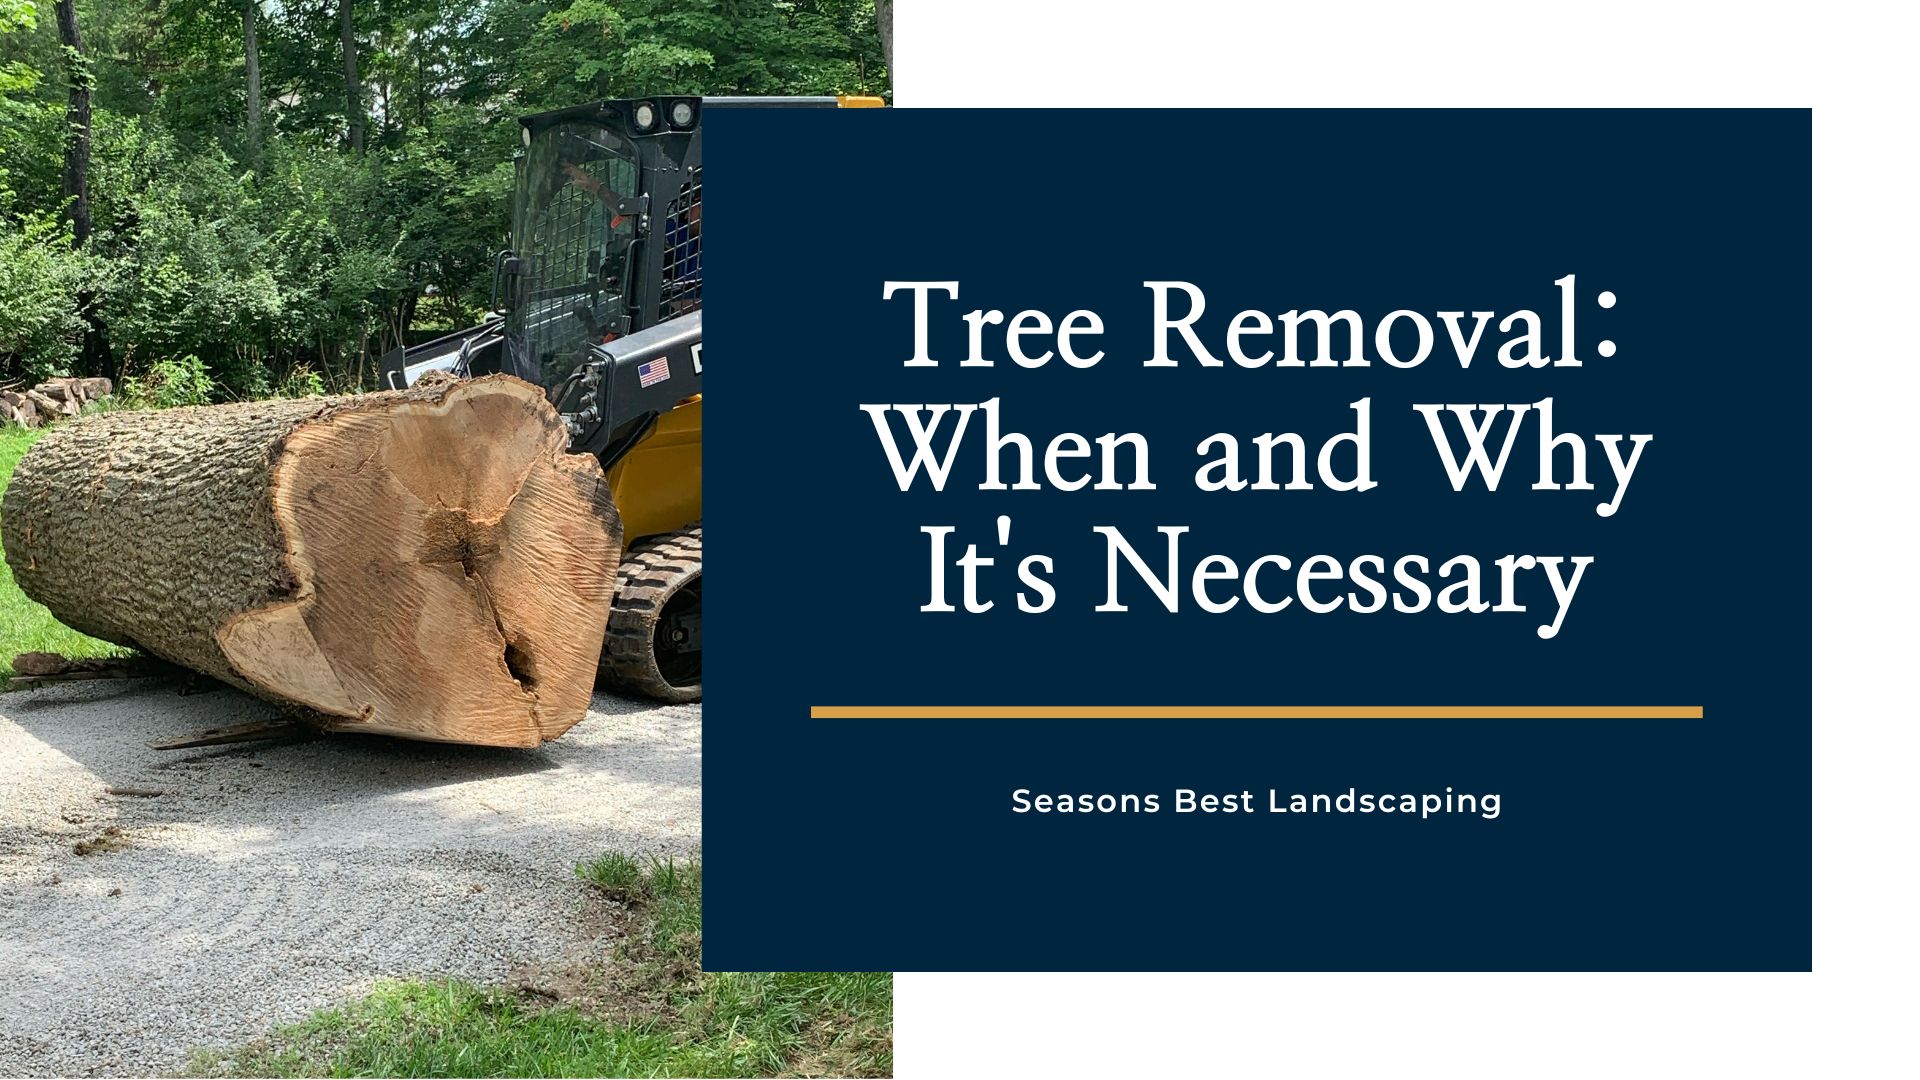 Tree Removal When and Why It's Necessary